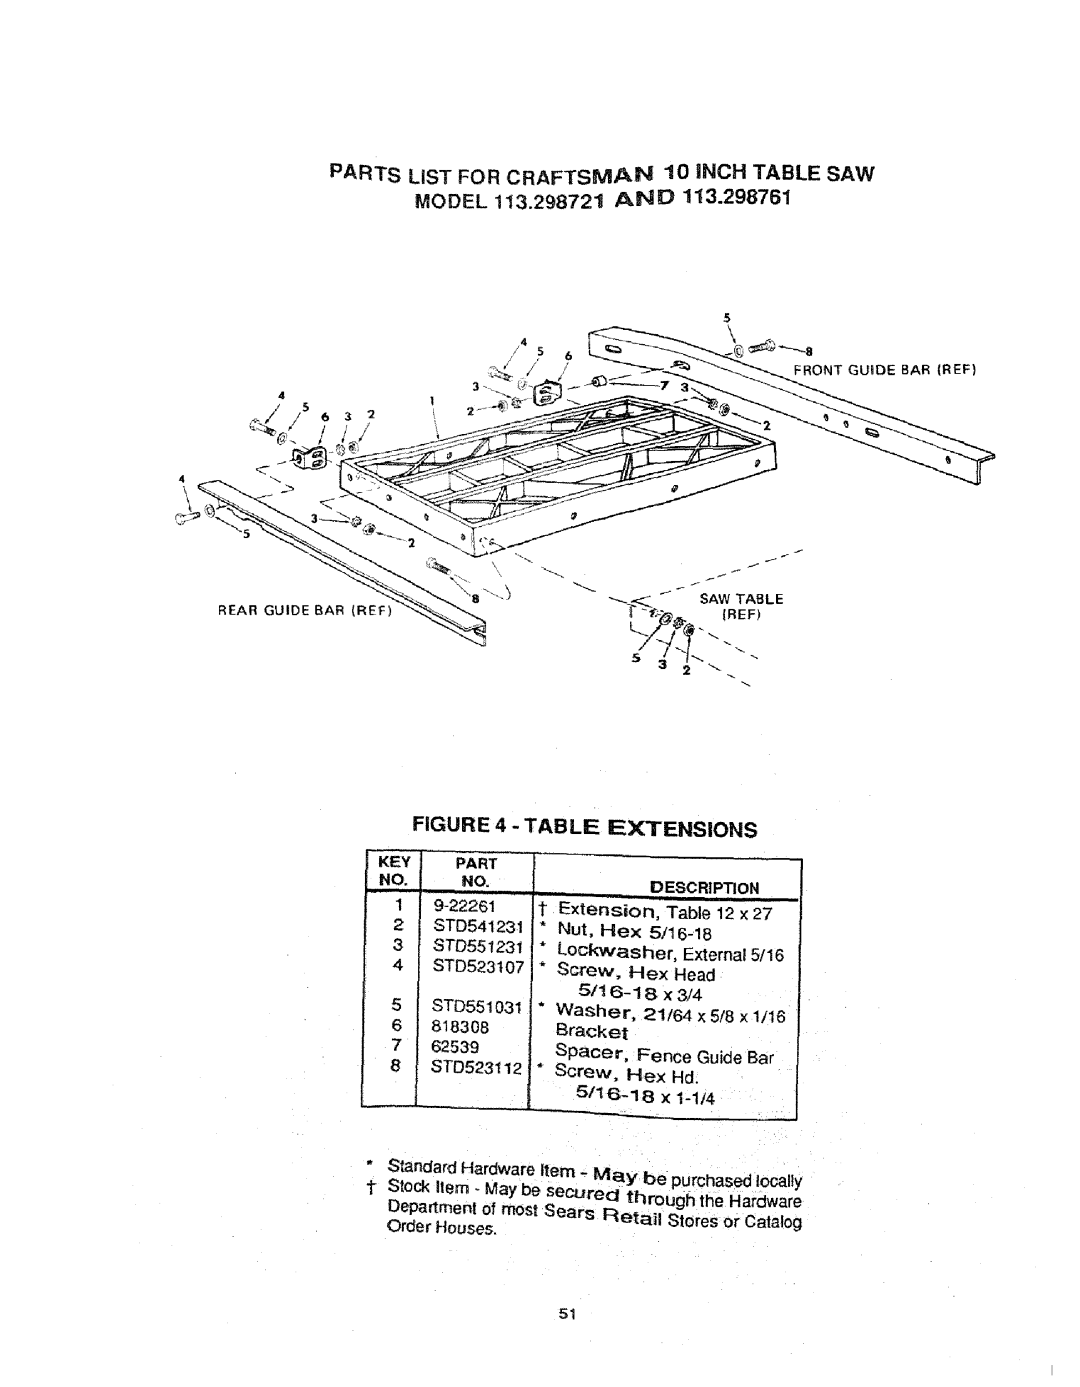 Craftsman 113.298721, 113.298761 manual PARTs LiST FOR CRAFTSMA 10 iNCH TABLE SAW, Table Extensions, MODEL 113.298721 AE 